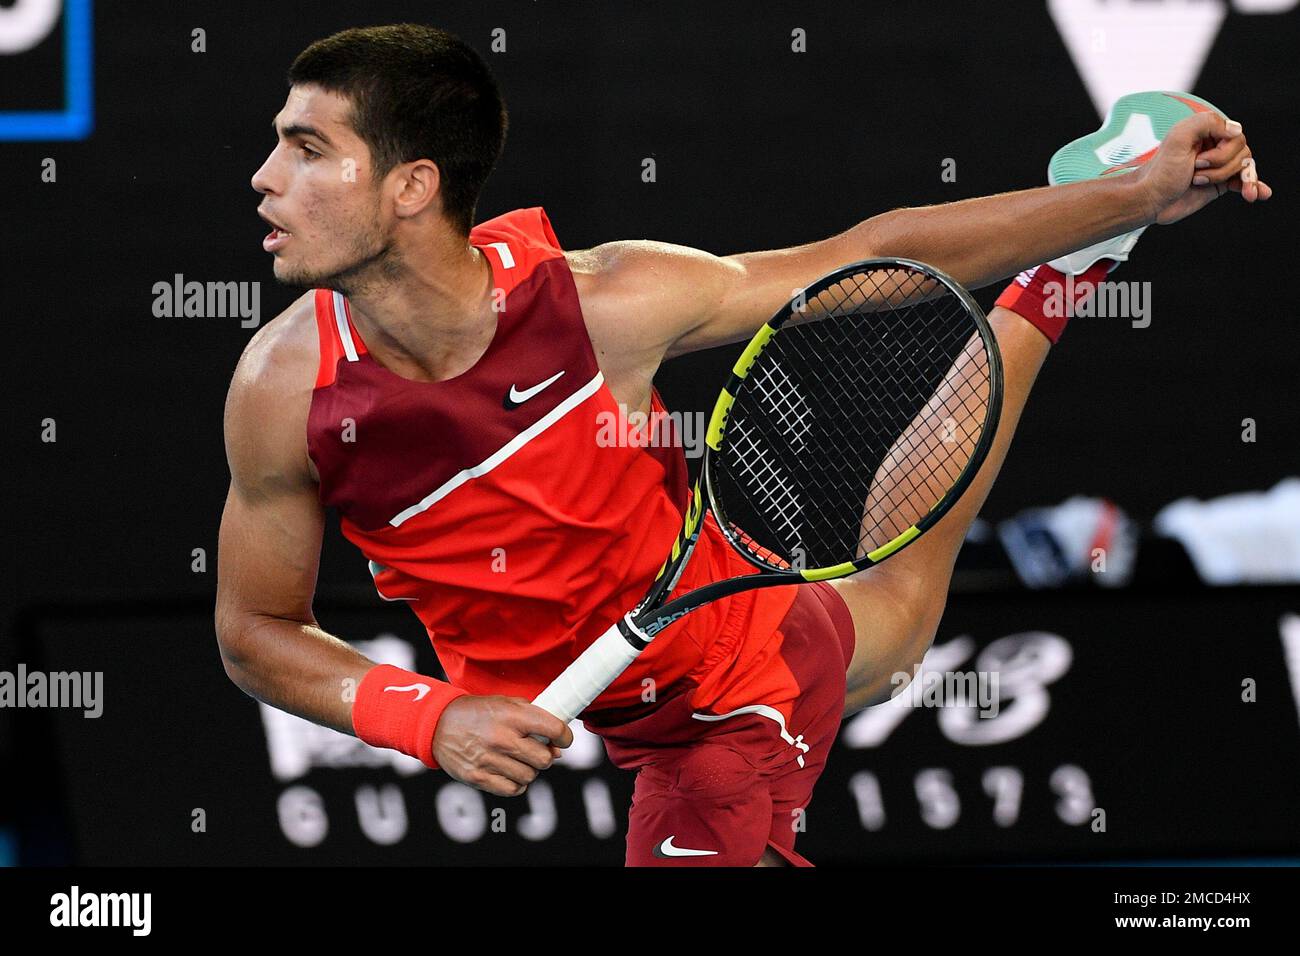 Carlos Alcaraz of Spain serves to Matteo Berrettini of Italy during their third round match at the Australian Open tennis championships in Melbourne, Australia, Friday, Jan